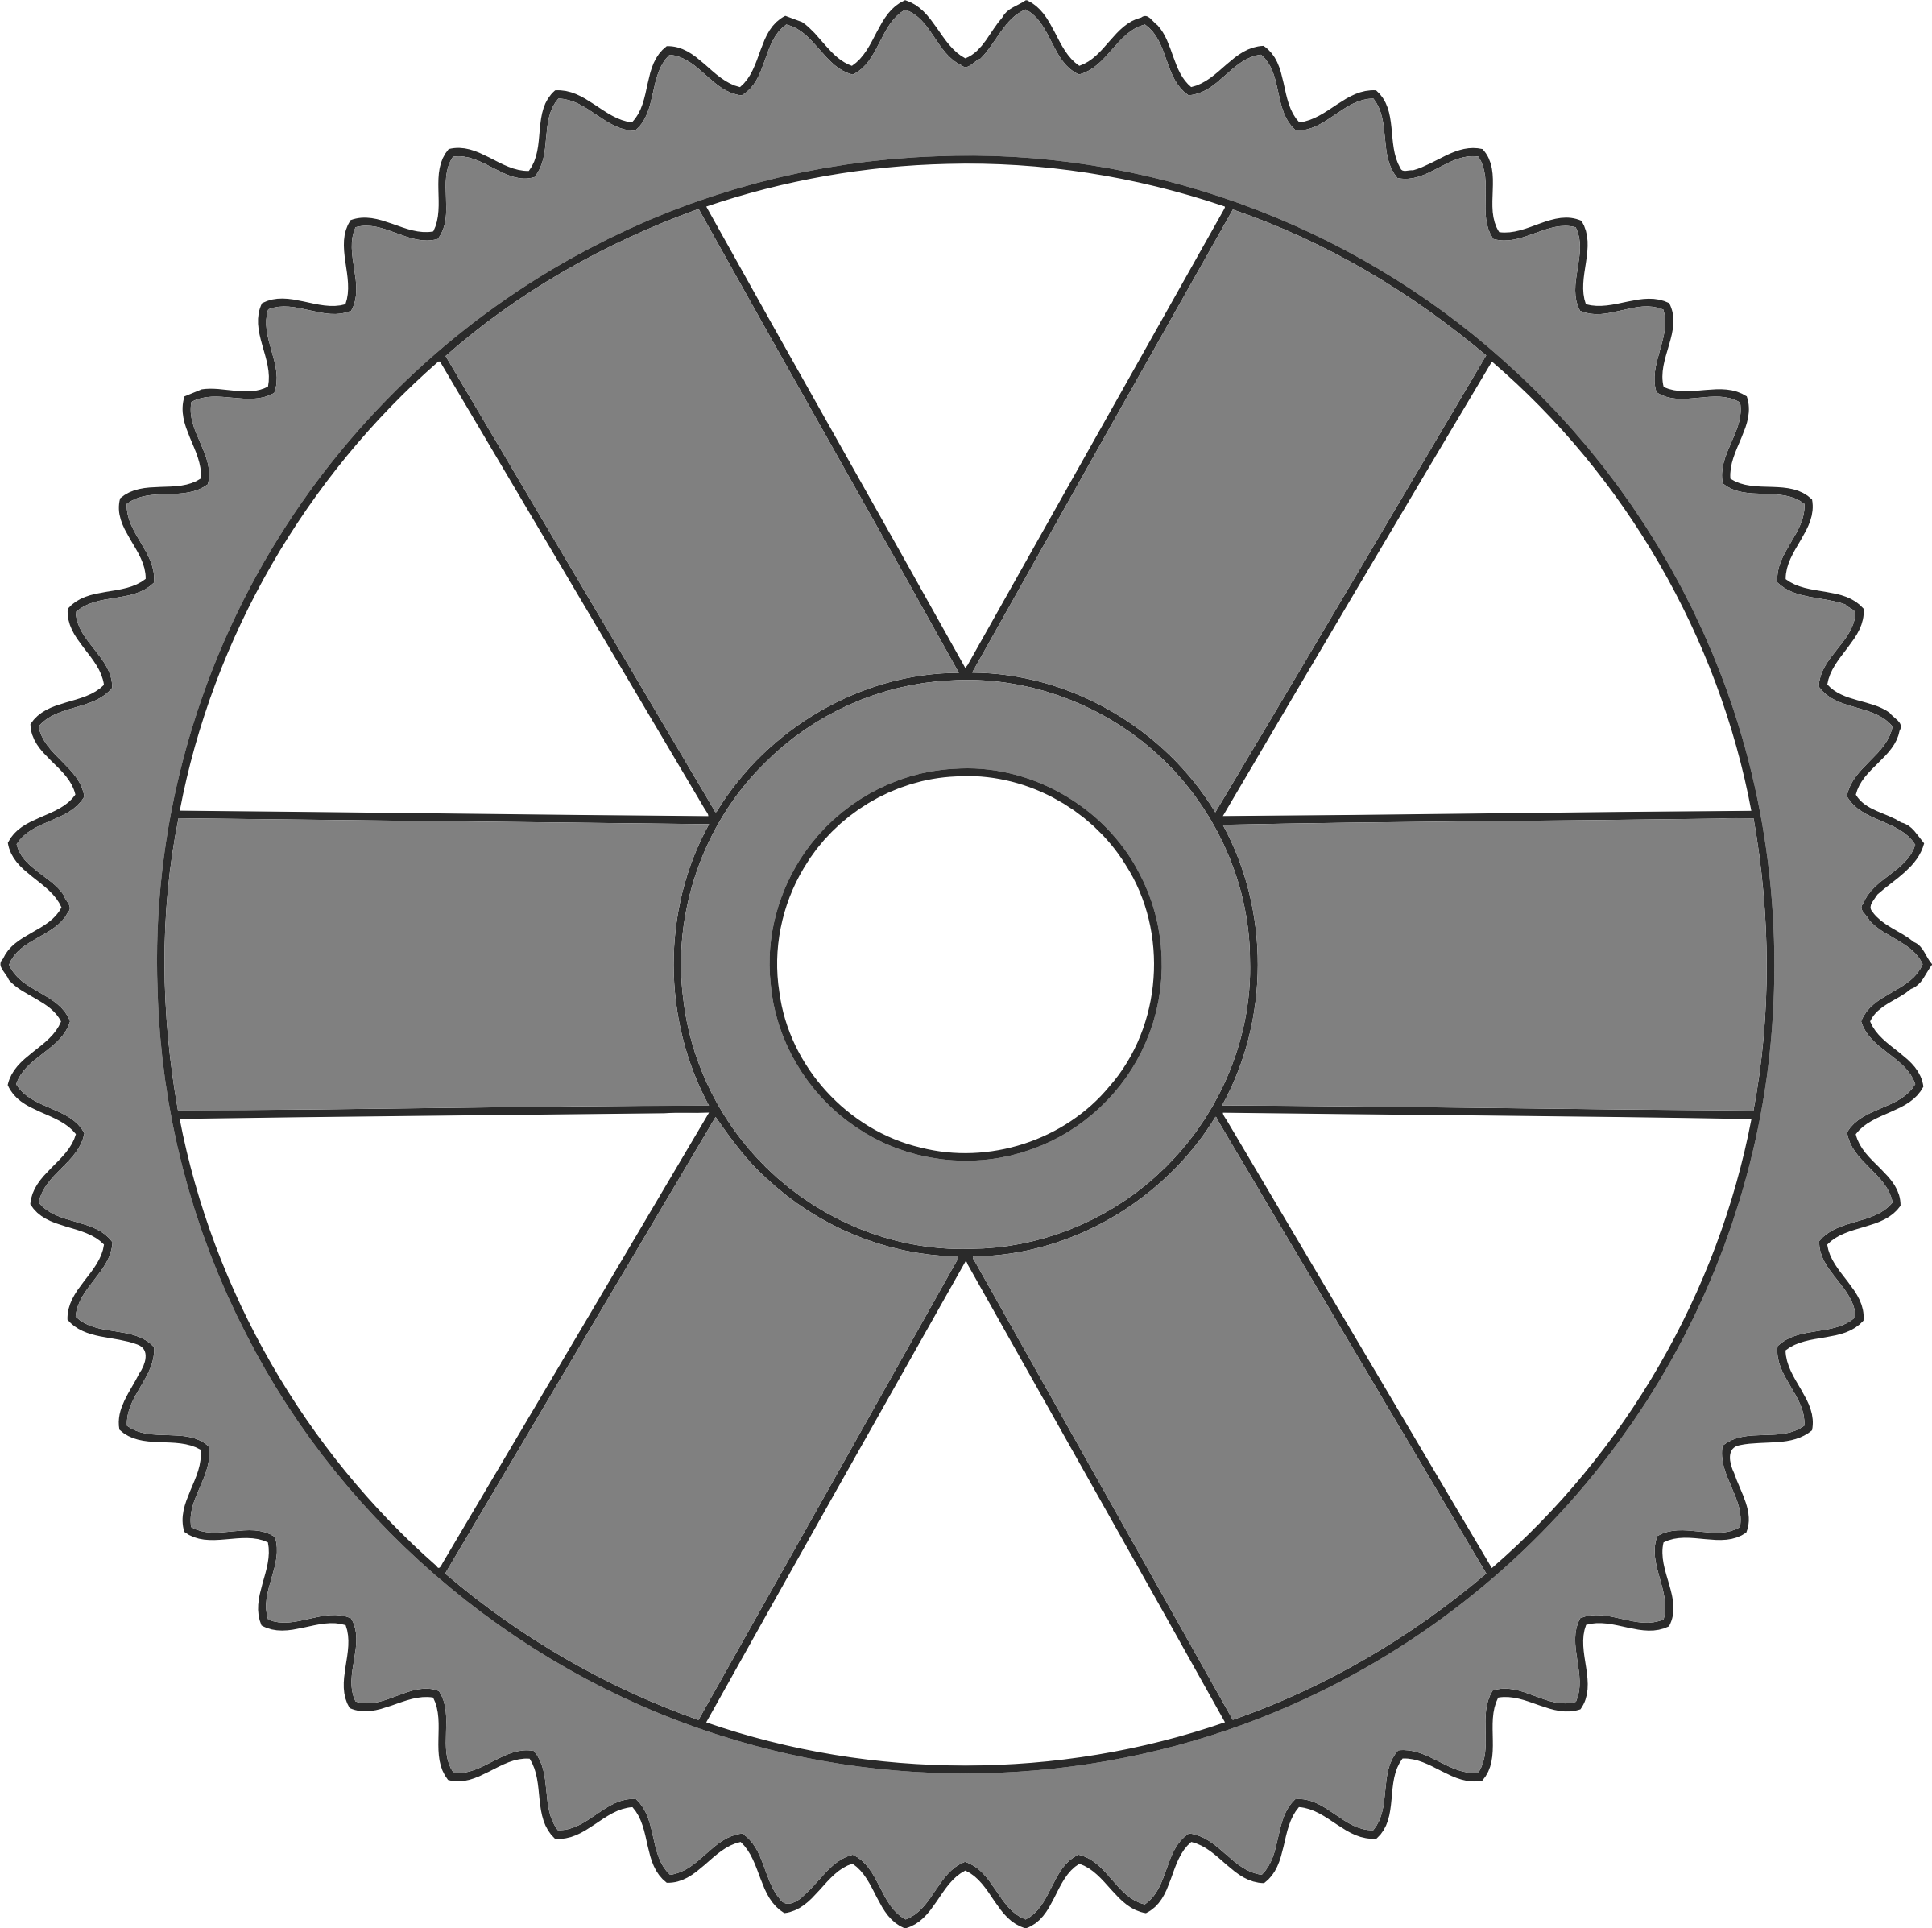 50-tooth Gear With Rectangular Spokes - Gold Seal (2399x2394)